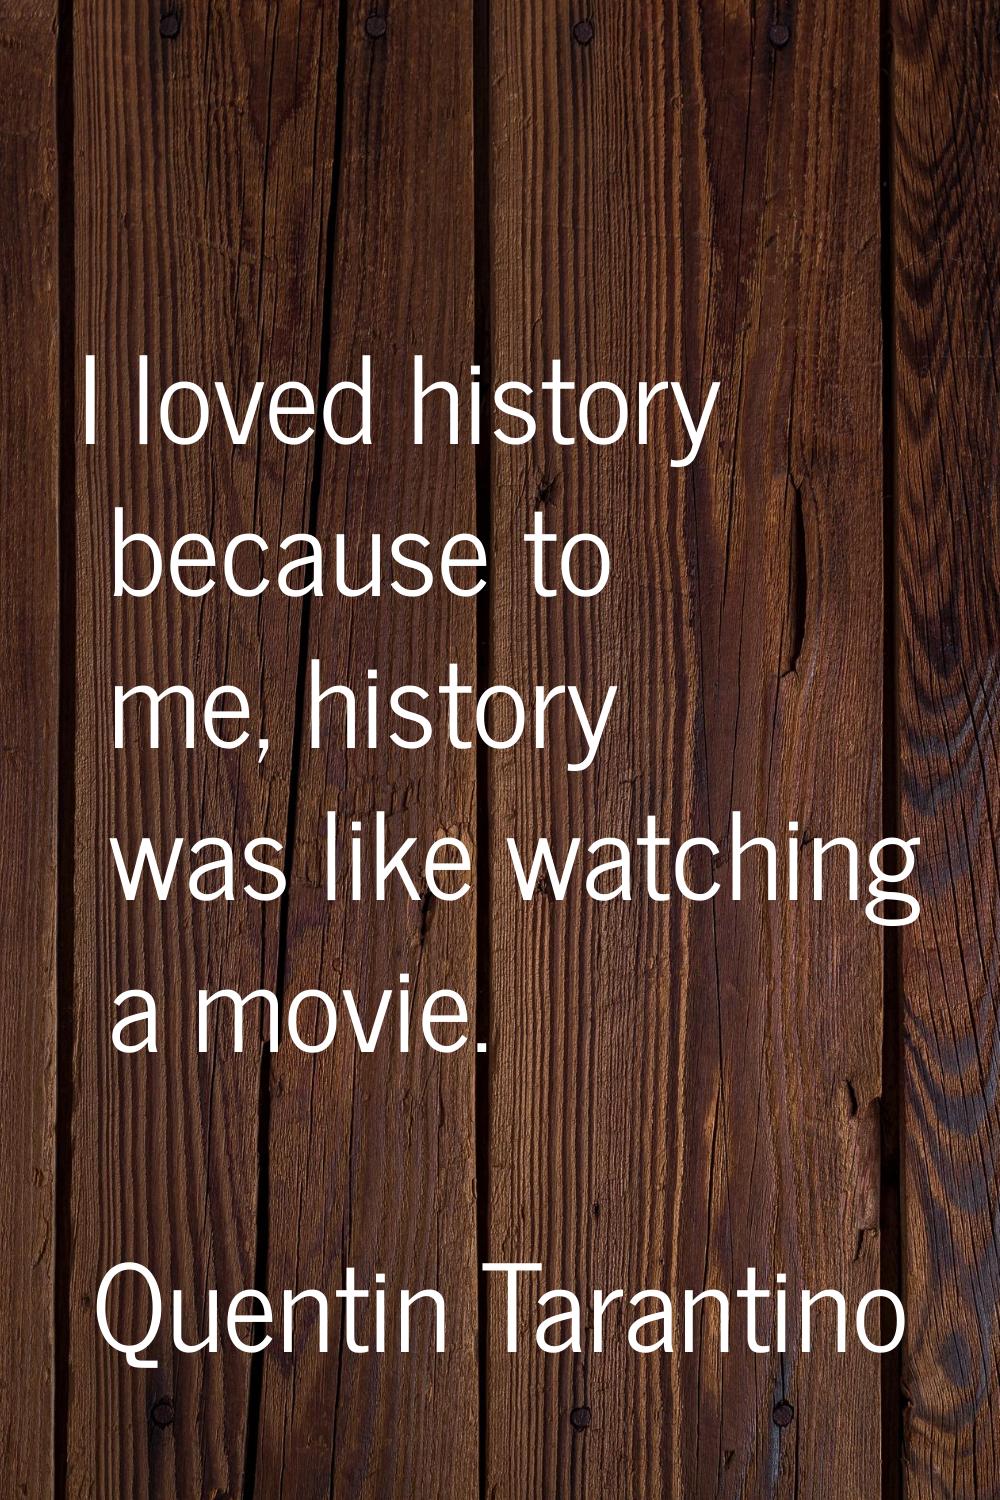 I loved history because to me, history was like watching a movie.